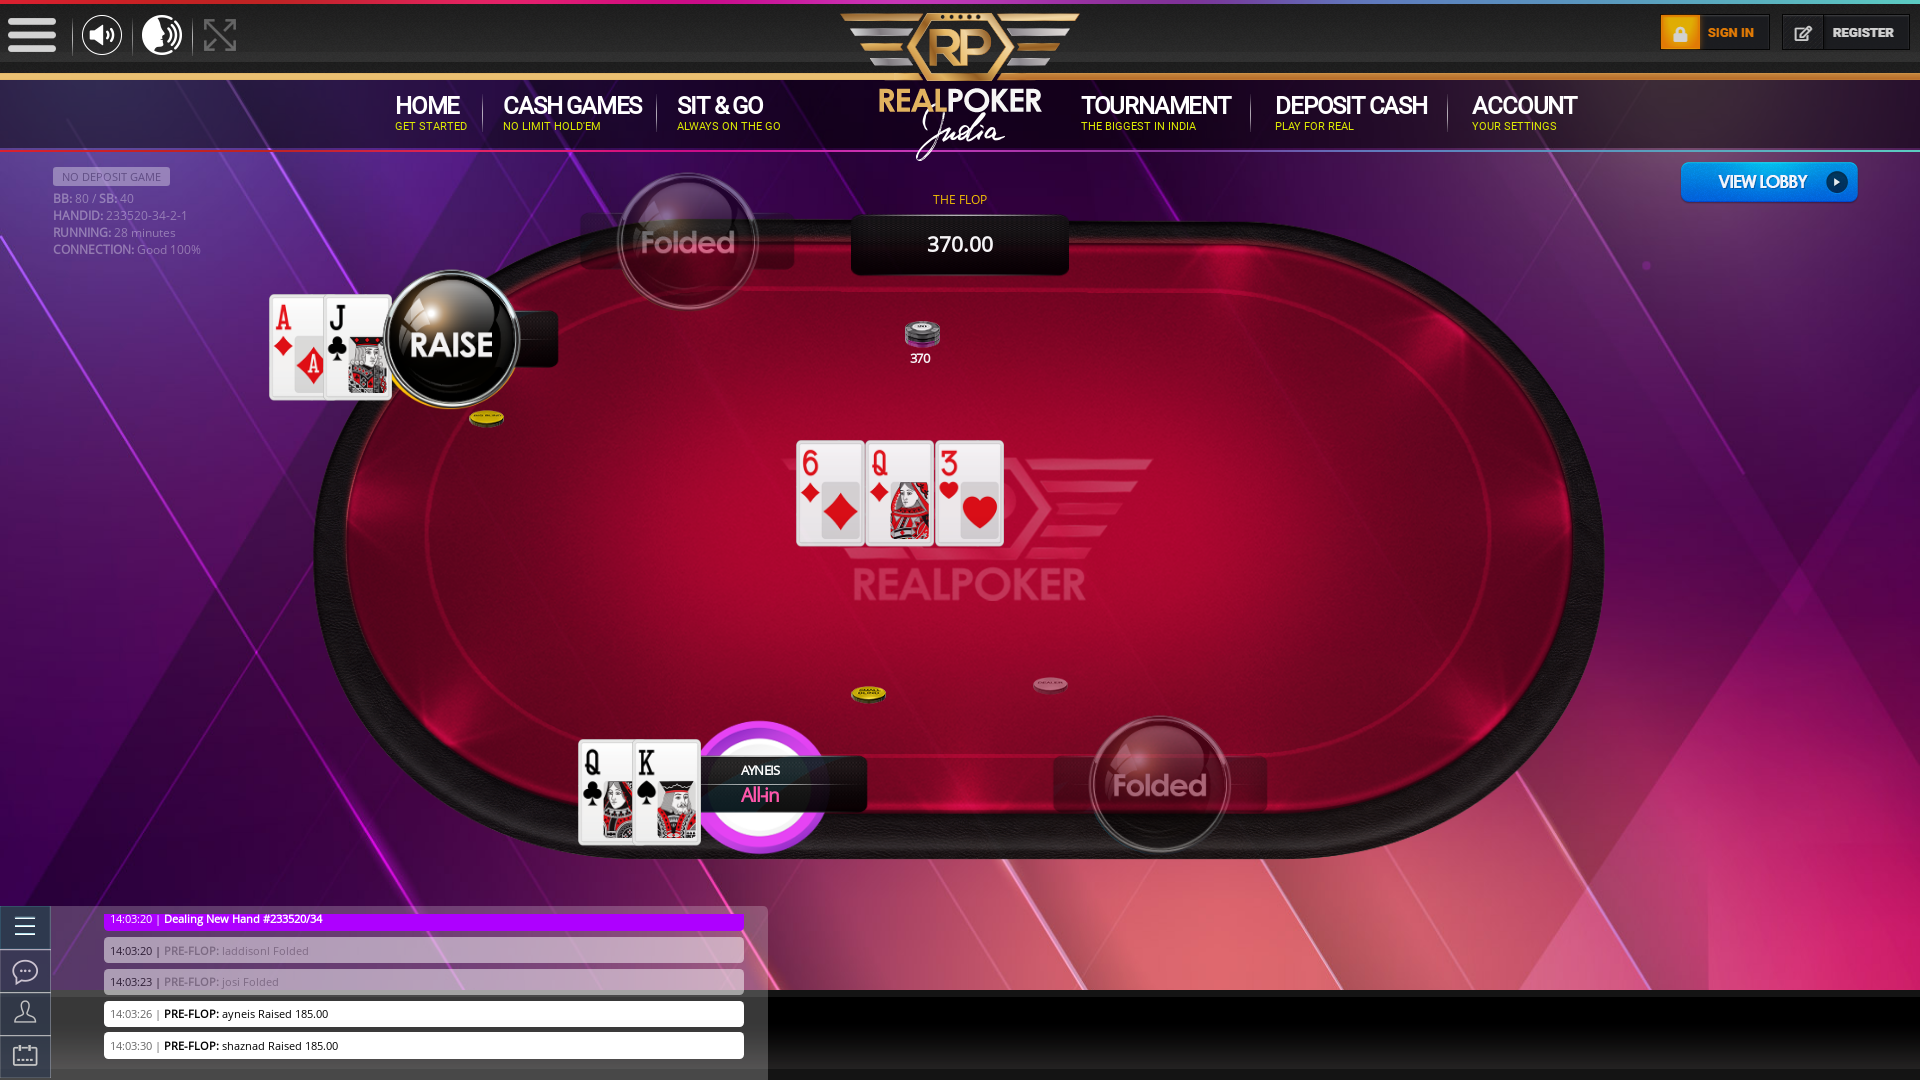 Online poker on a 10 player table in the 28th minute match up